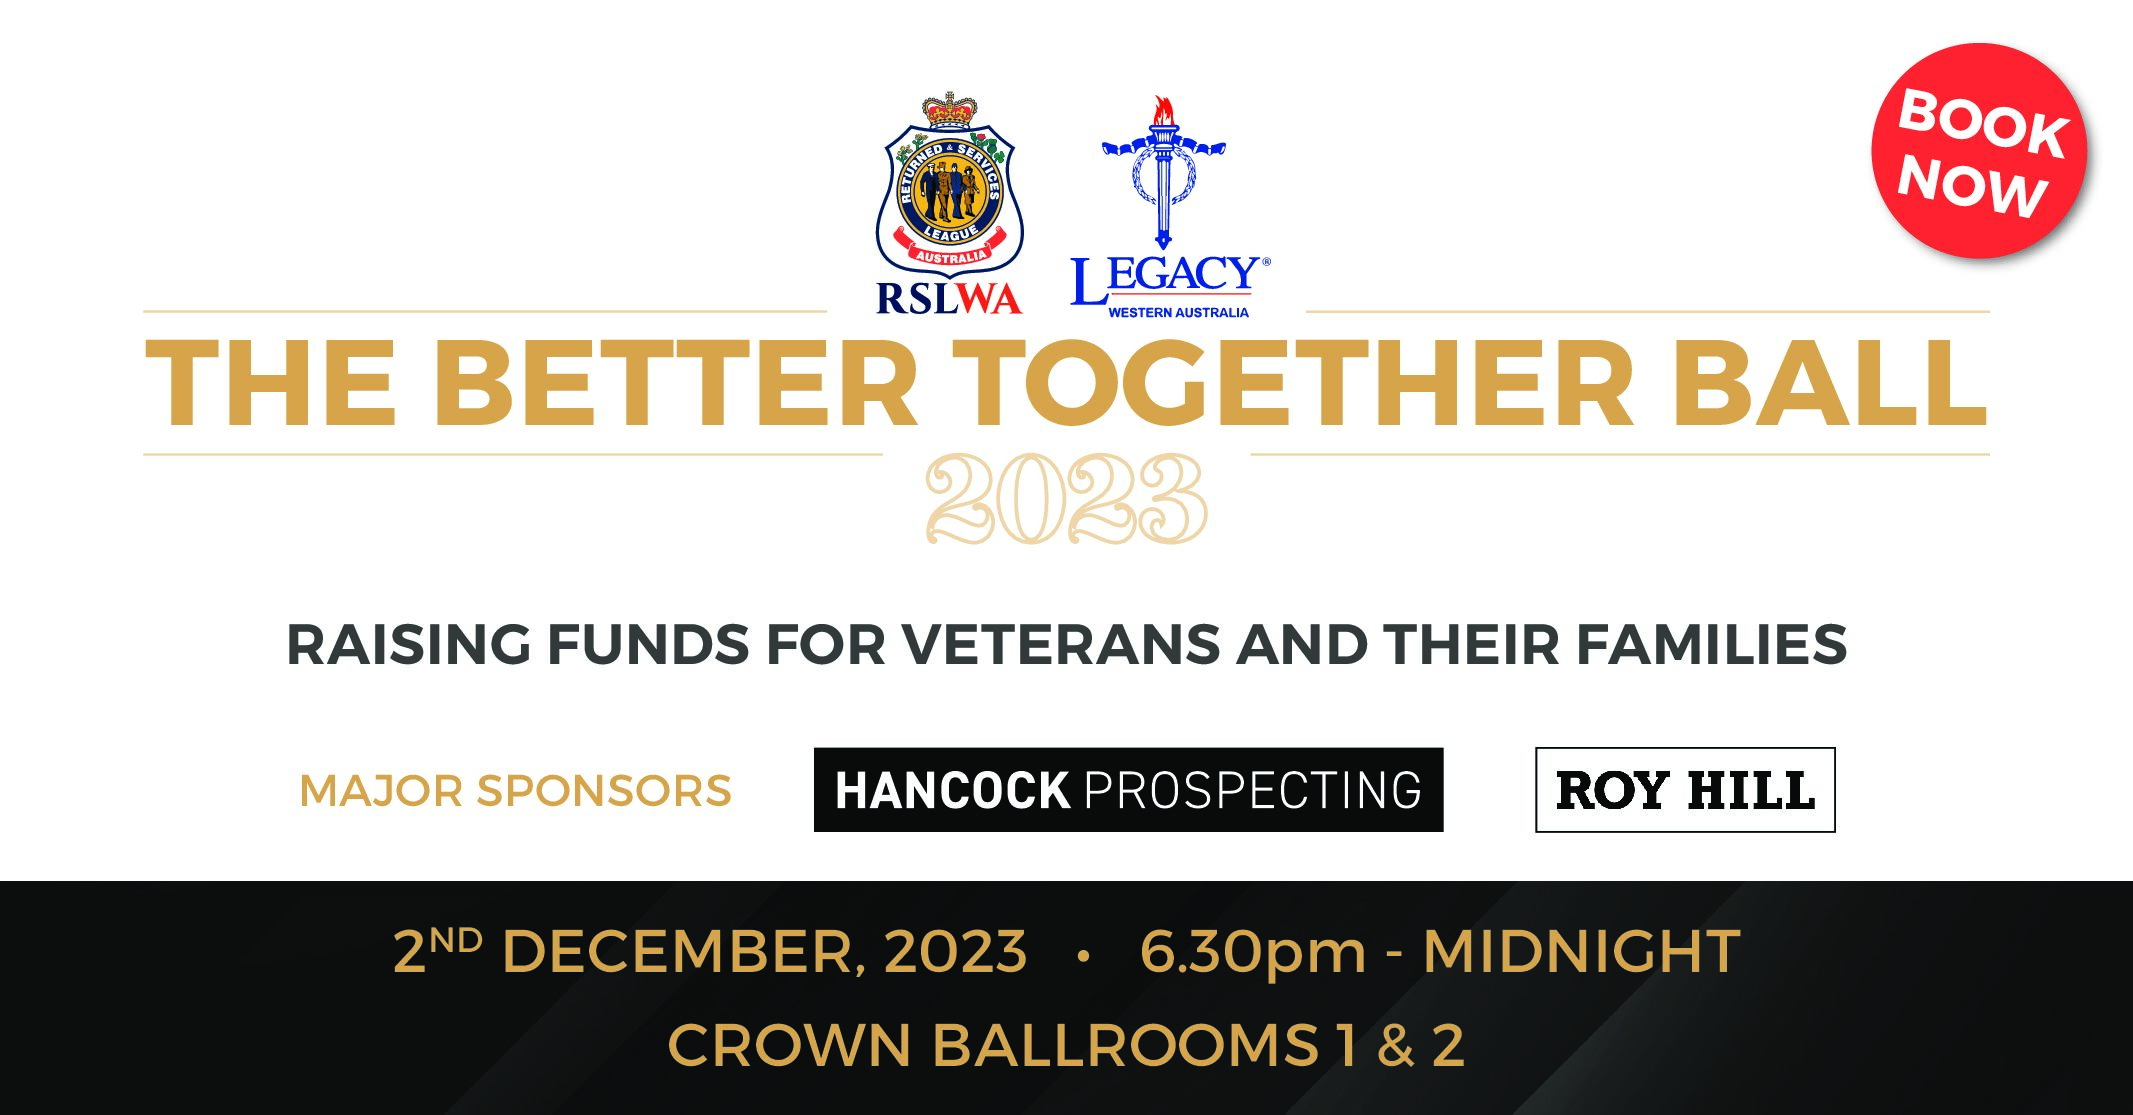 The Better Together Ball – Hancock Prospecting and Roy Hill join as Major Sponsors